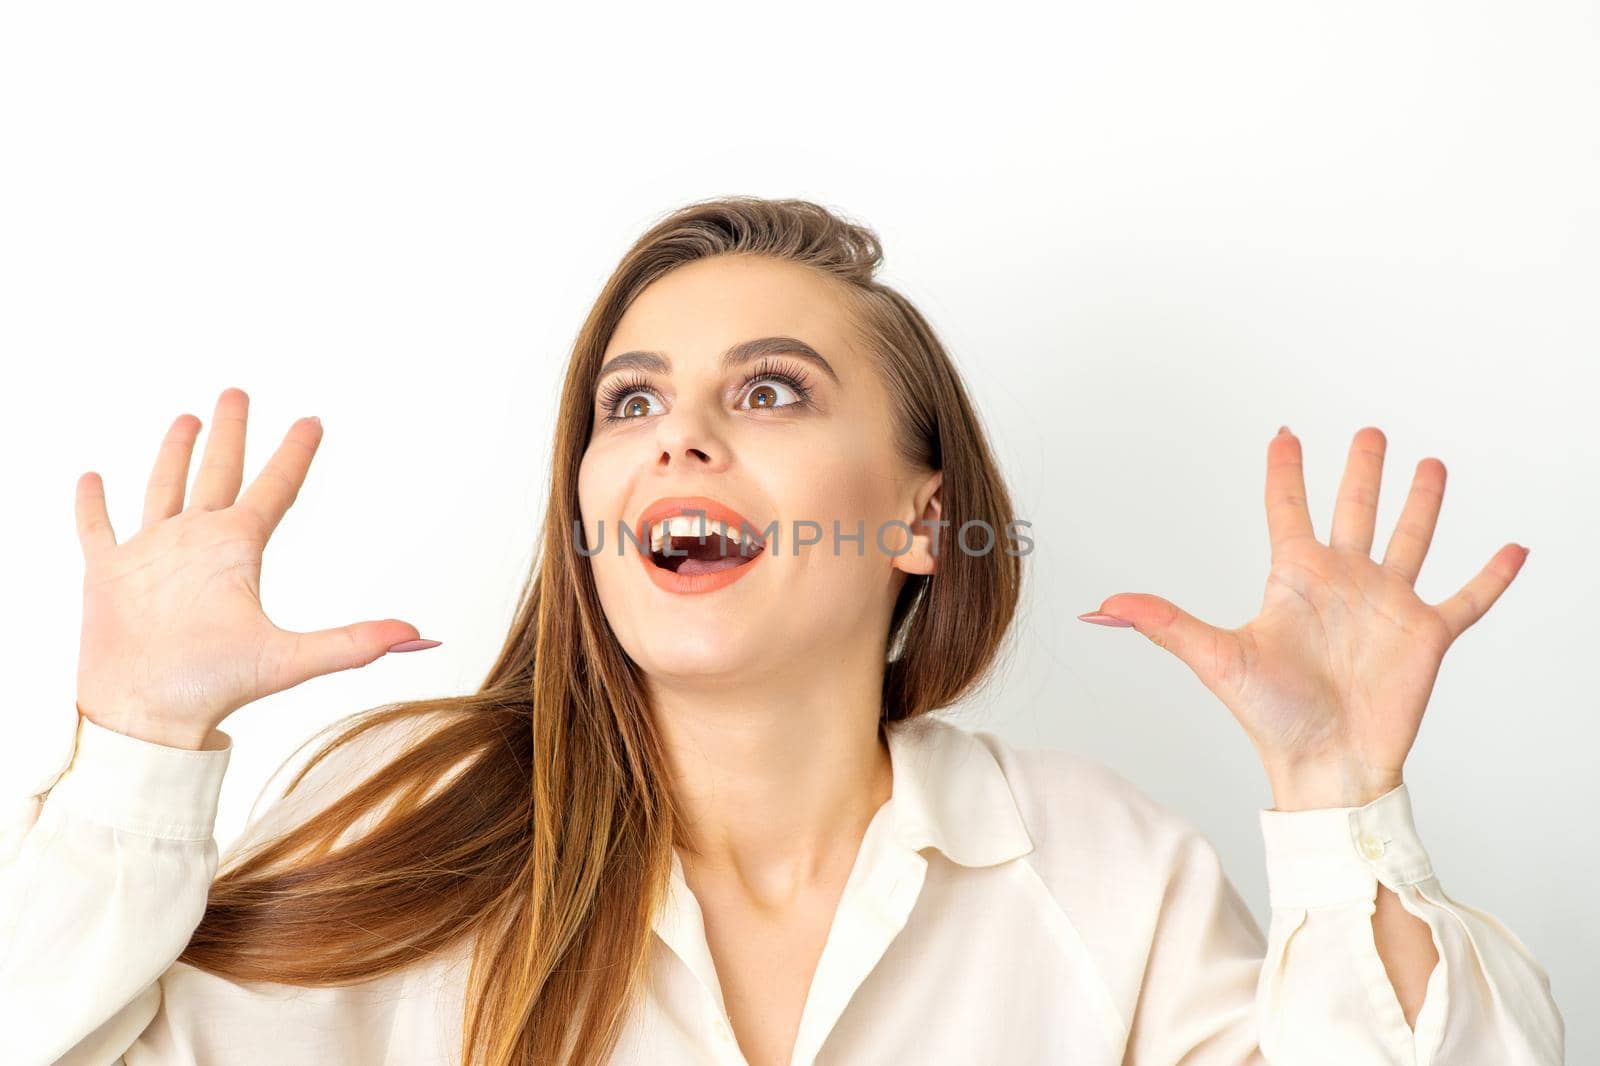 Portrait of young caucasian woman wearing white shirt raises hands and laughs positively with open mouth looking up against a white background